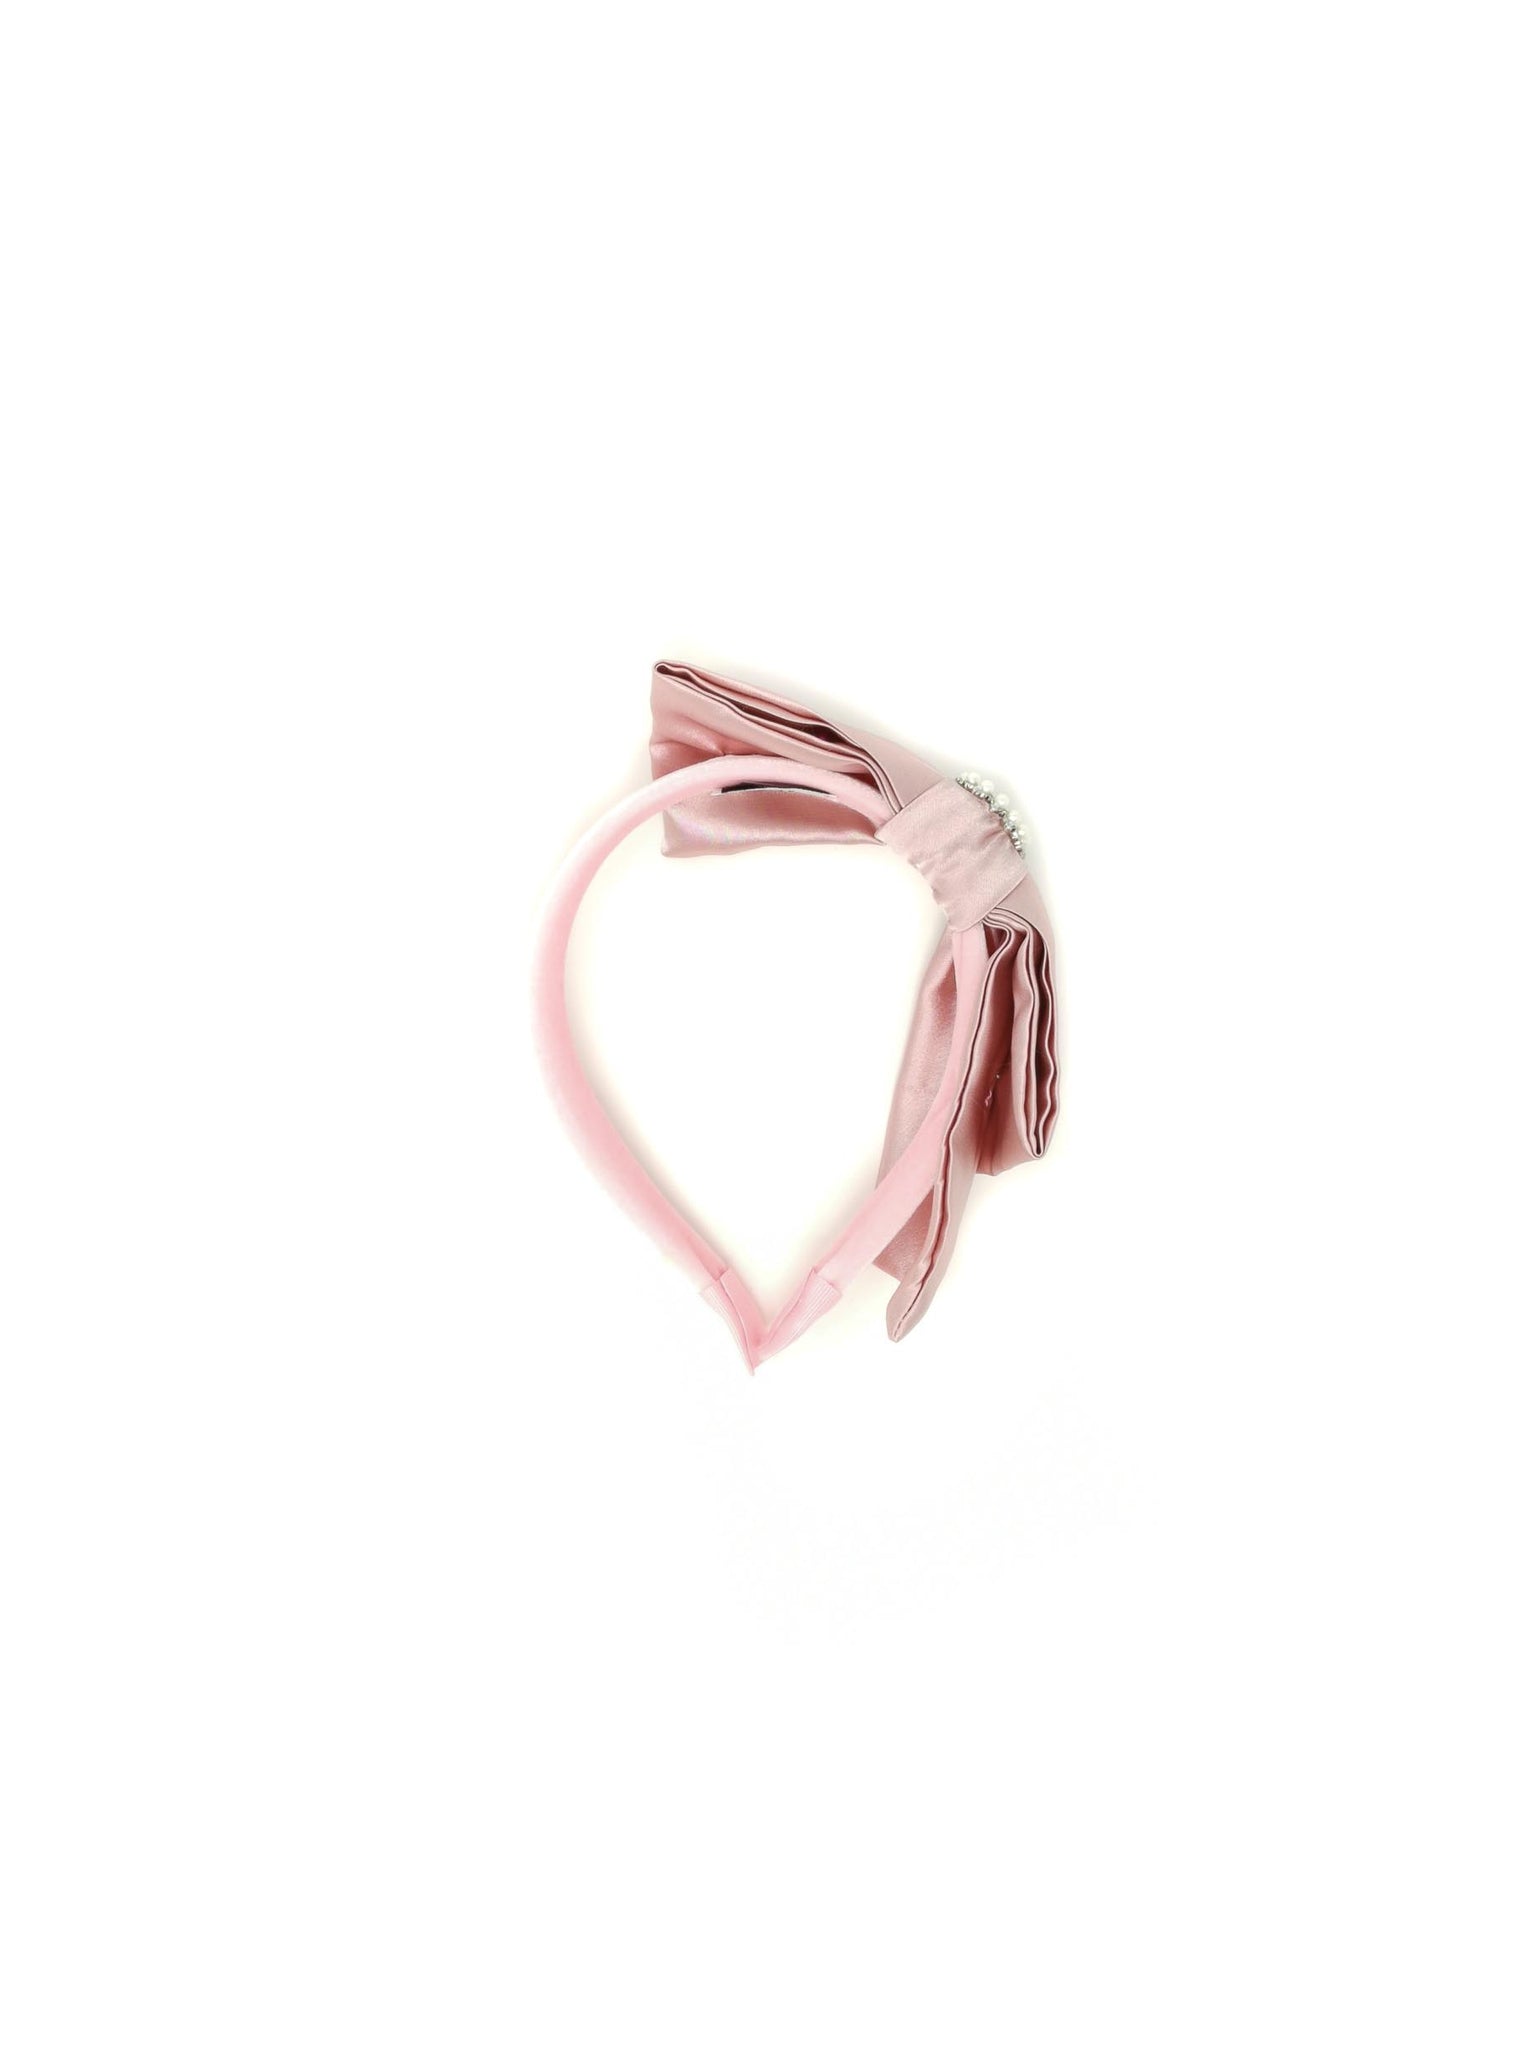 Pink satin hairband with lateral bow and crystals brooch